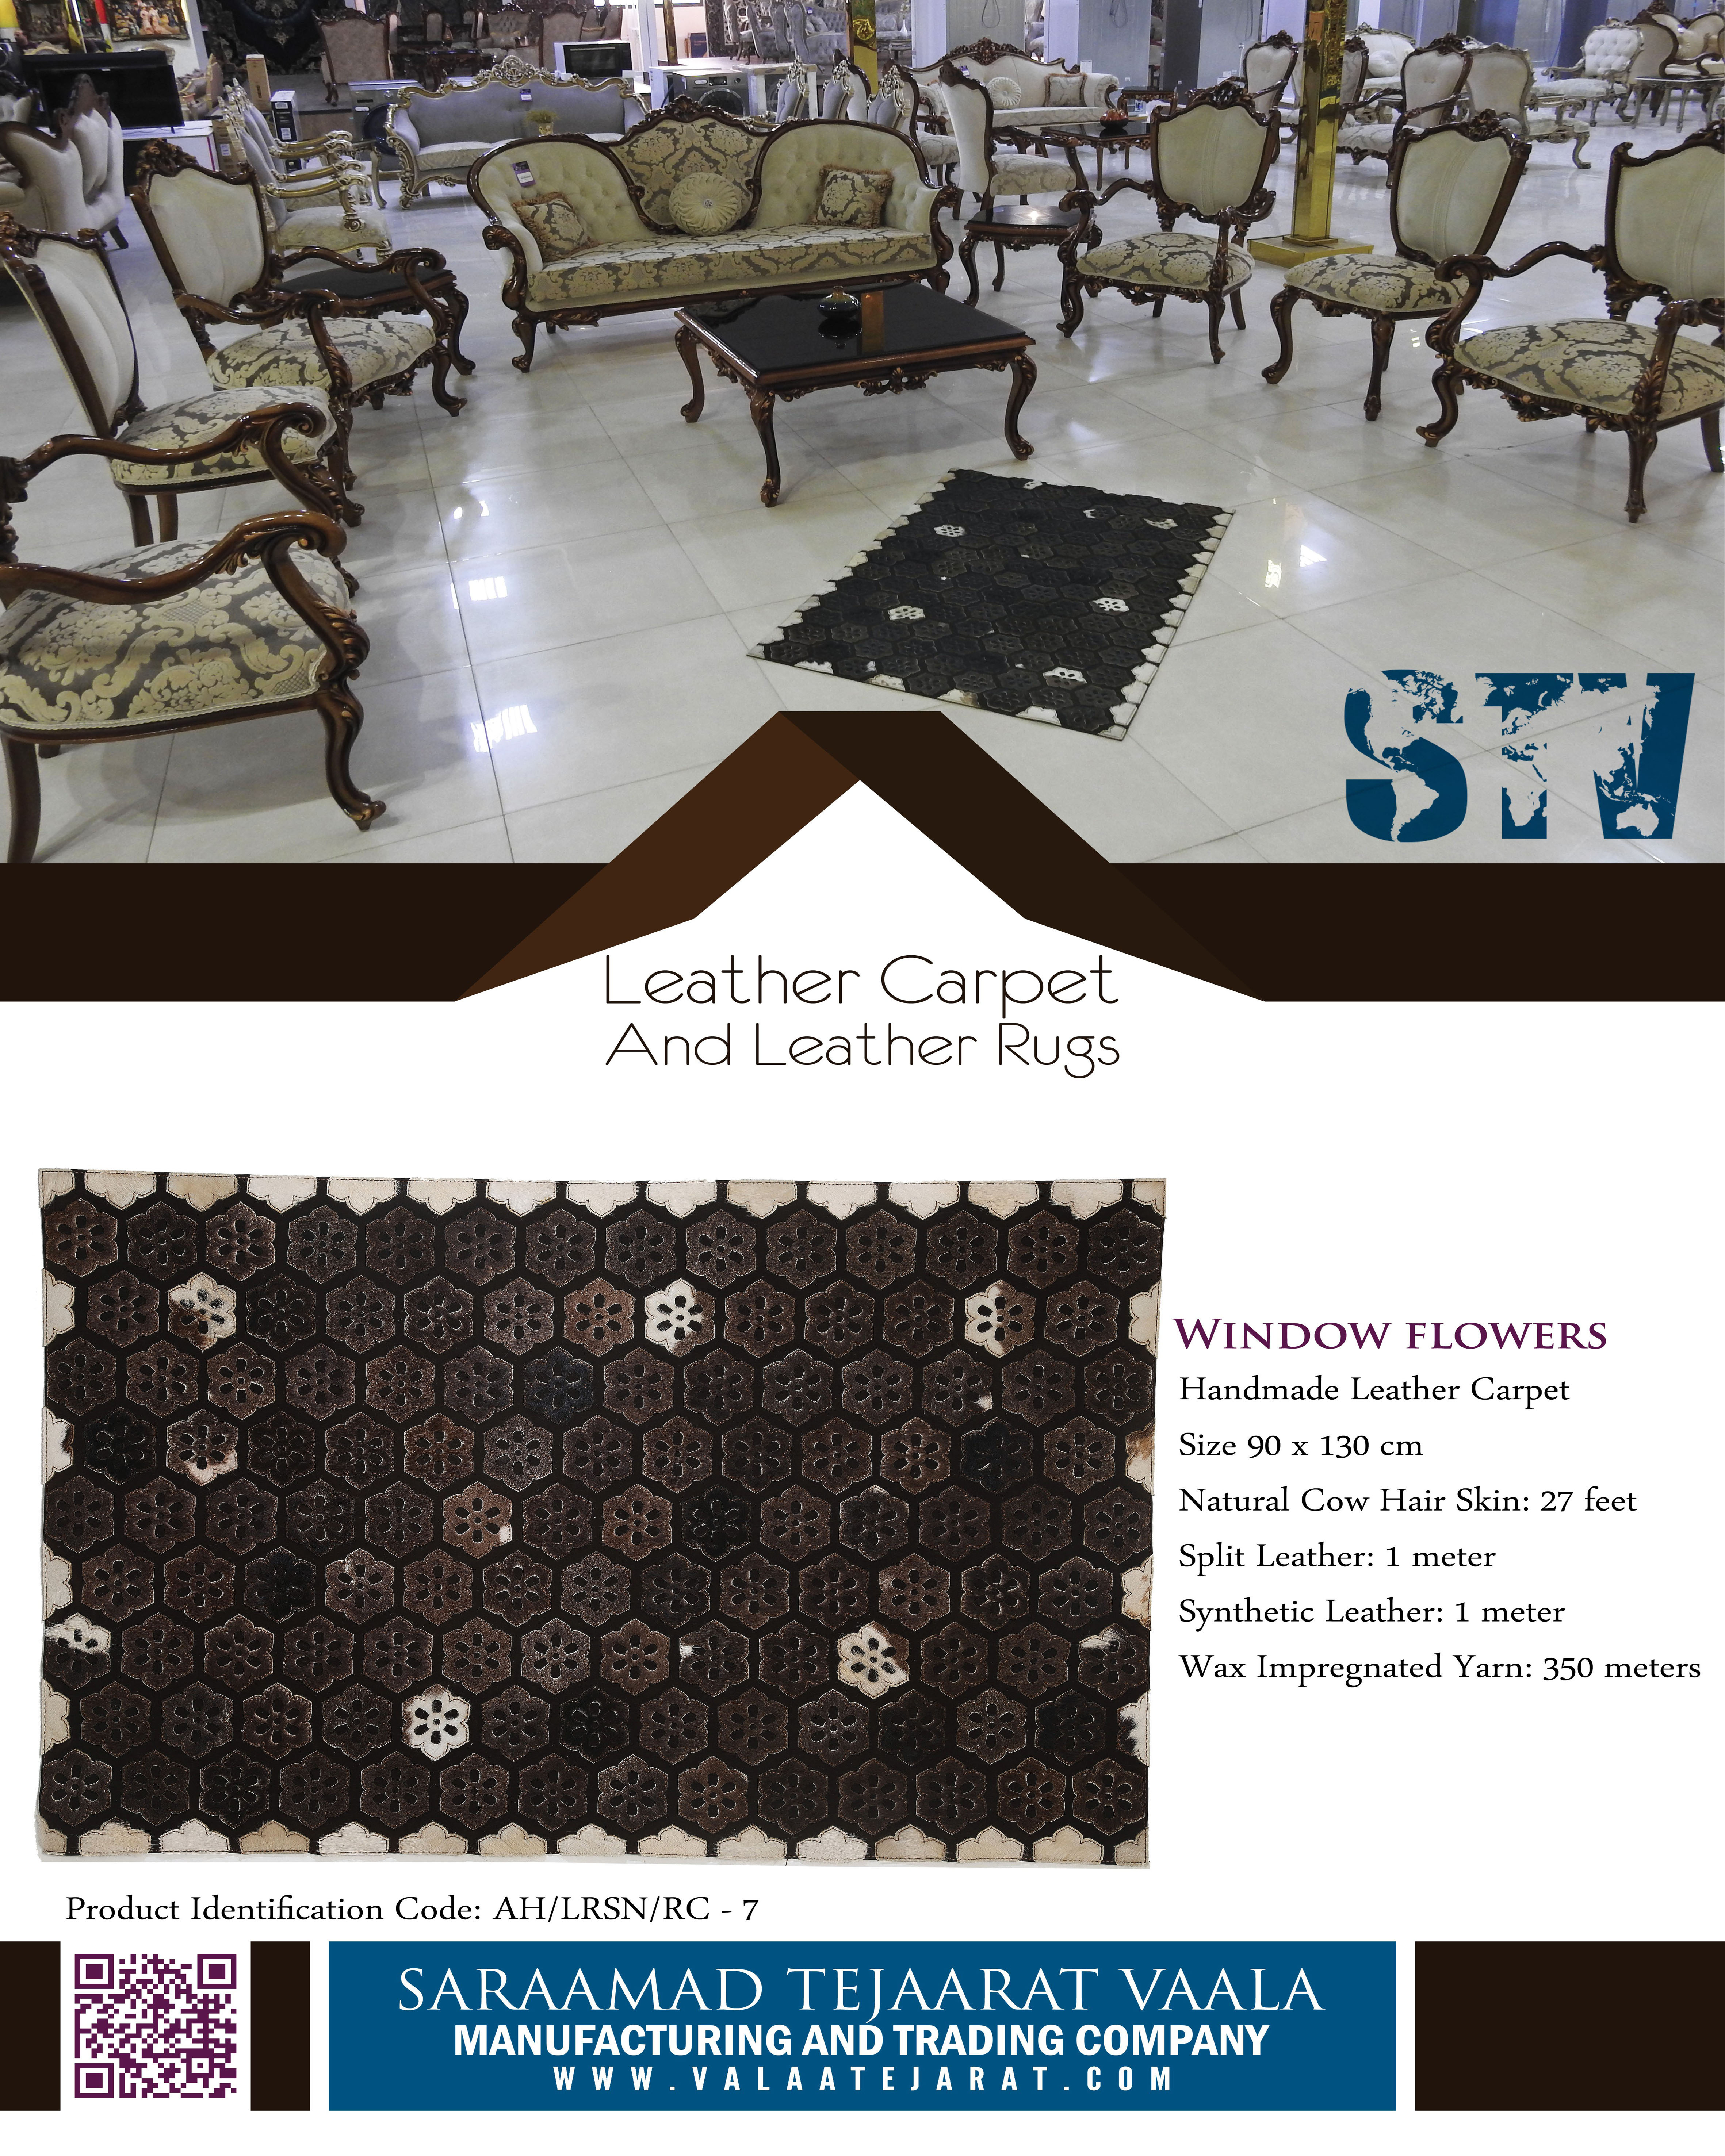 Leather rugs and carpets